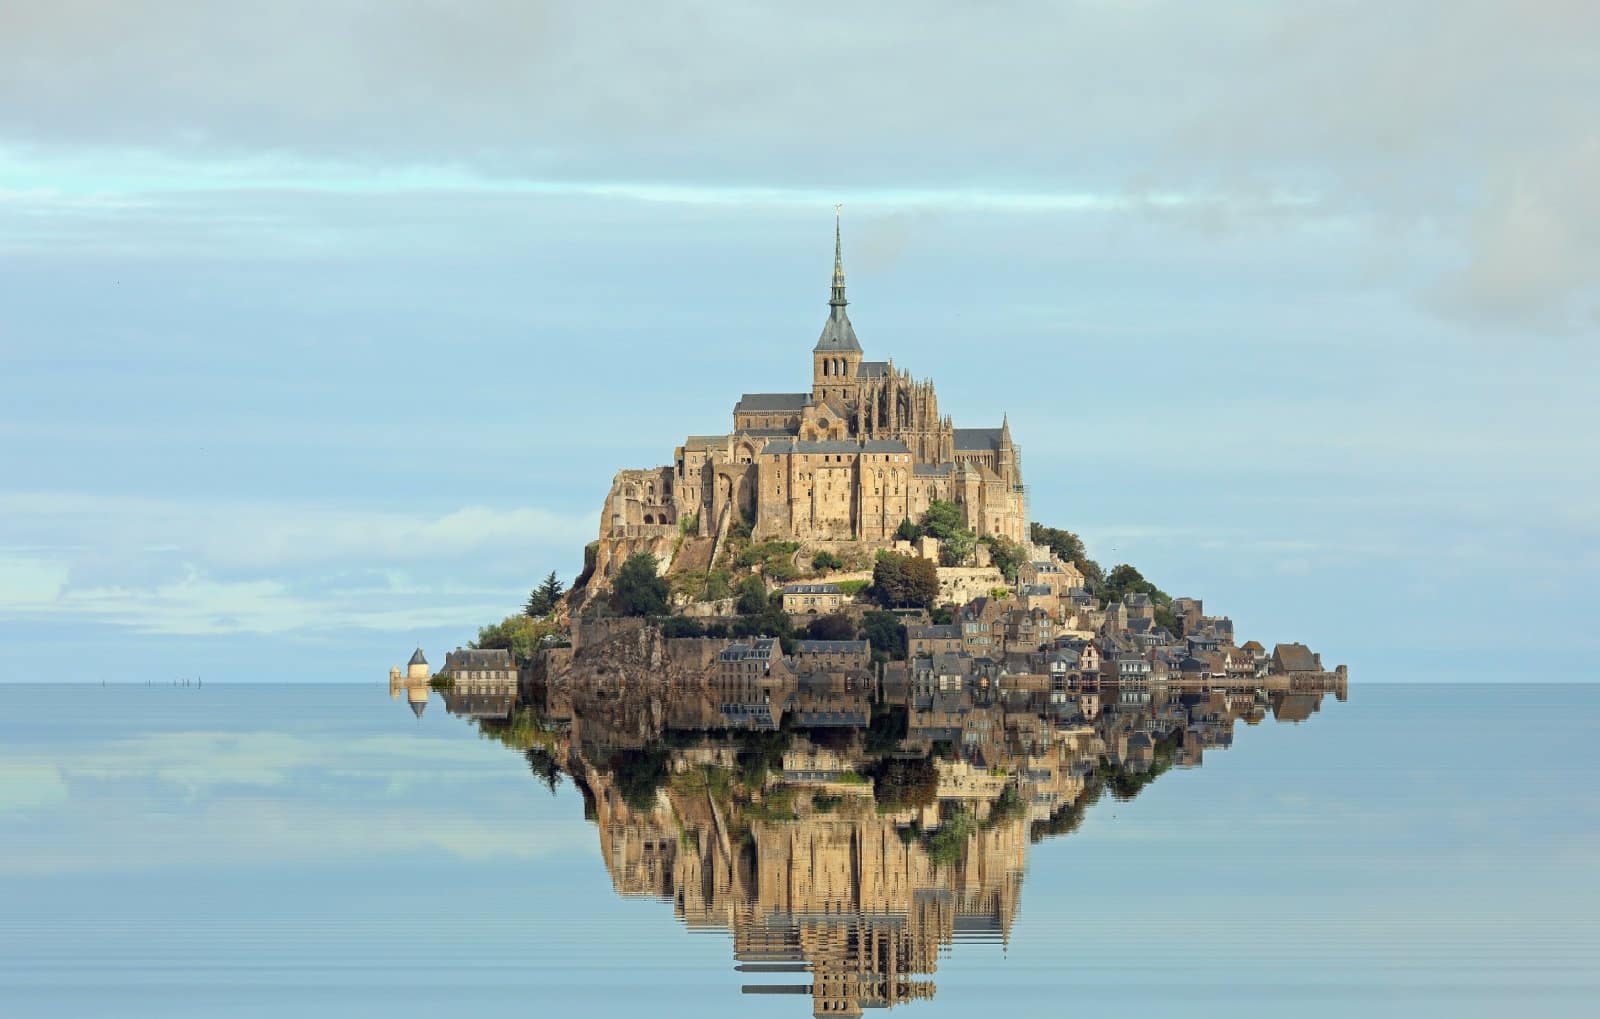 Image Credit: Shutterstock / ChiccoDodiFC <p>Mont Saint-Michel, a mystical island commune, becomes an enchanting sight at high tide, surrounded by the shimmering waters of Normandy.</p>